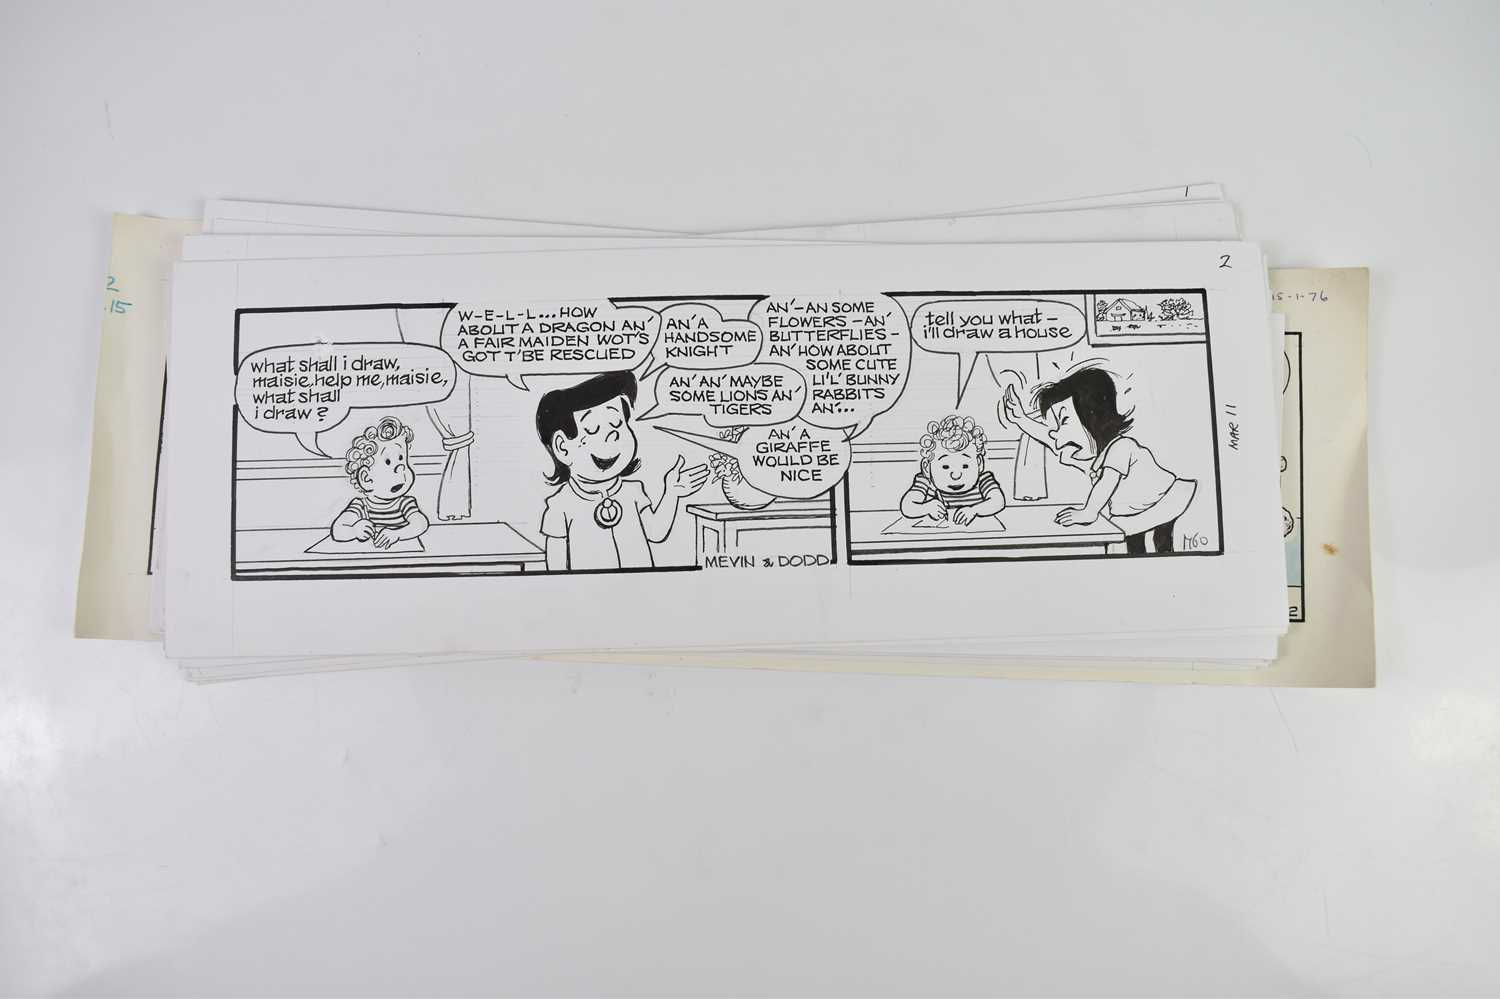 † BILL MEVIN (AND MAURICE DODD); twenty black and white original storyboard cartoons for The - Image 2 of 2